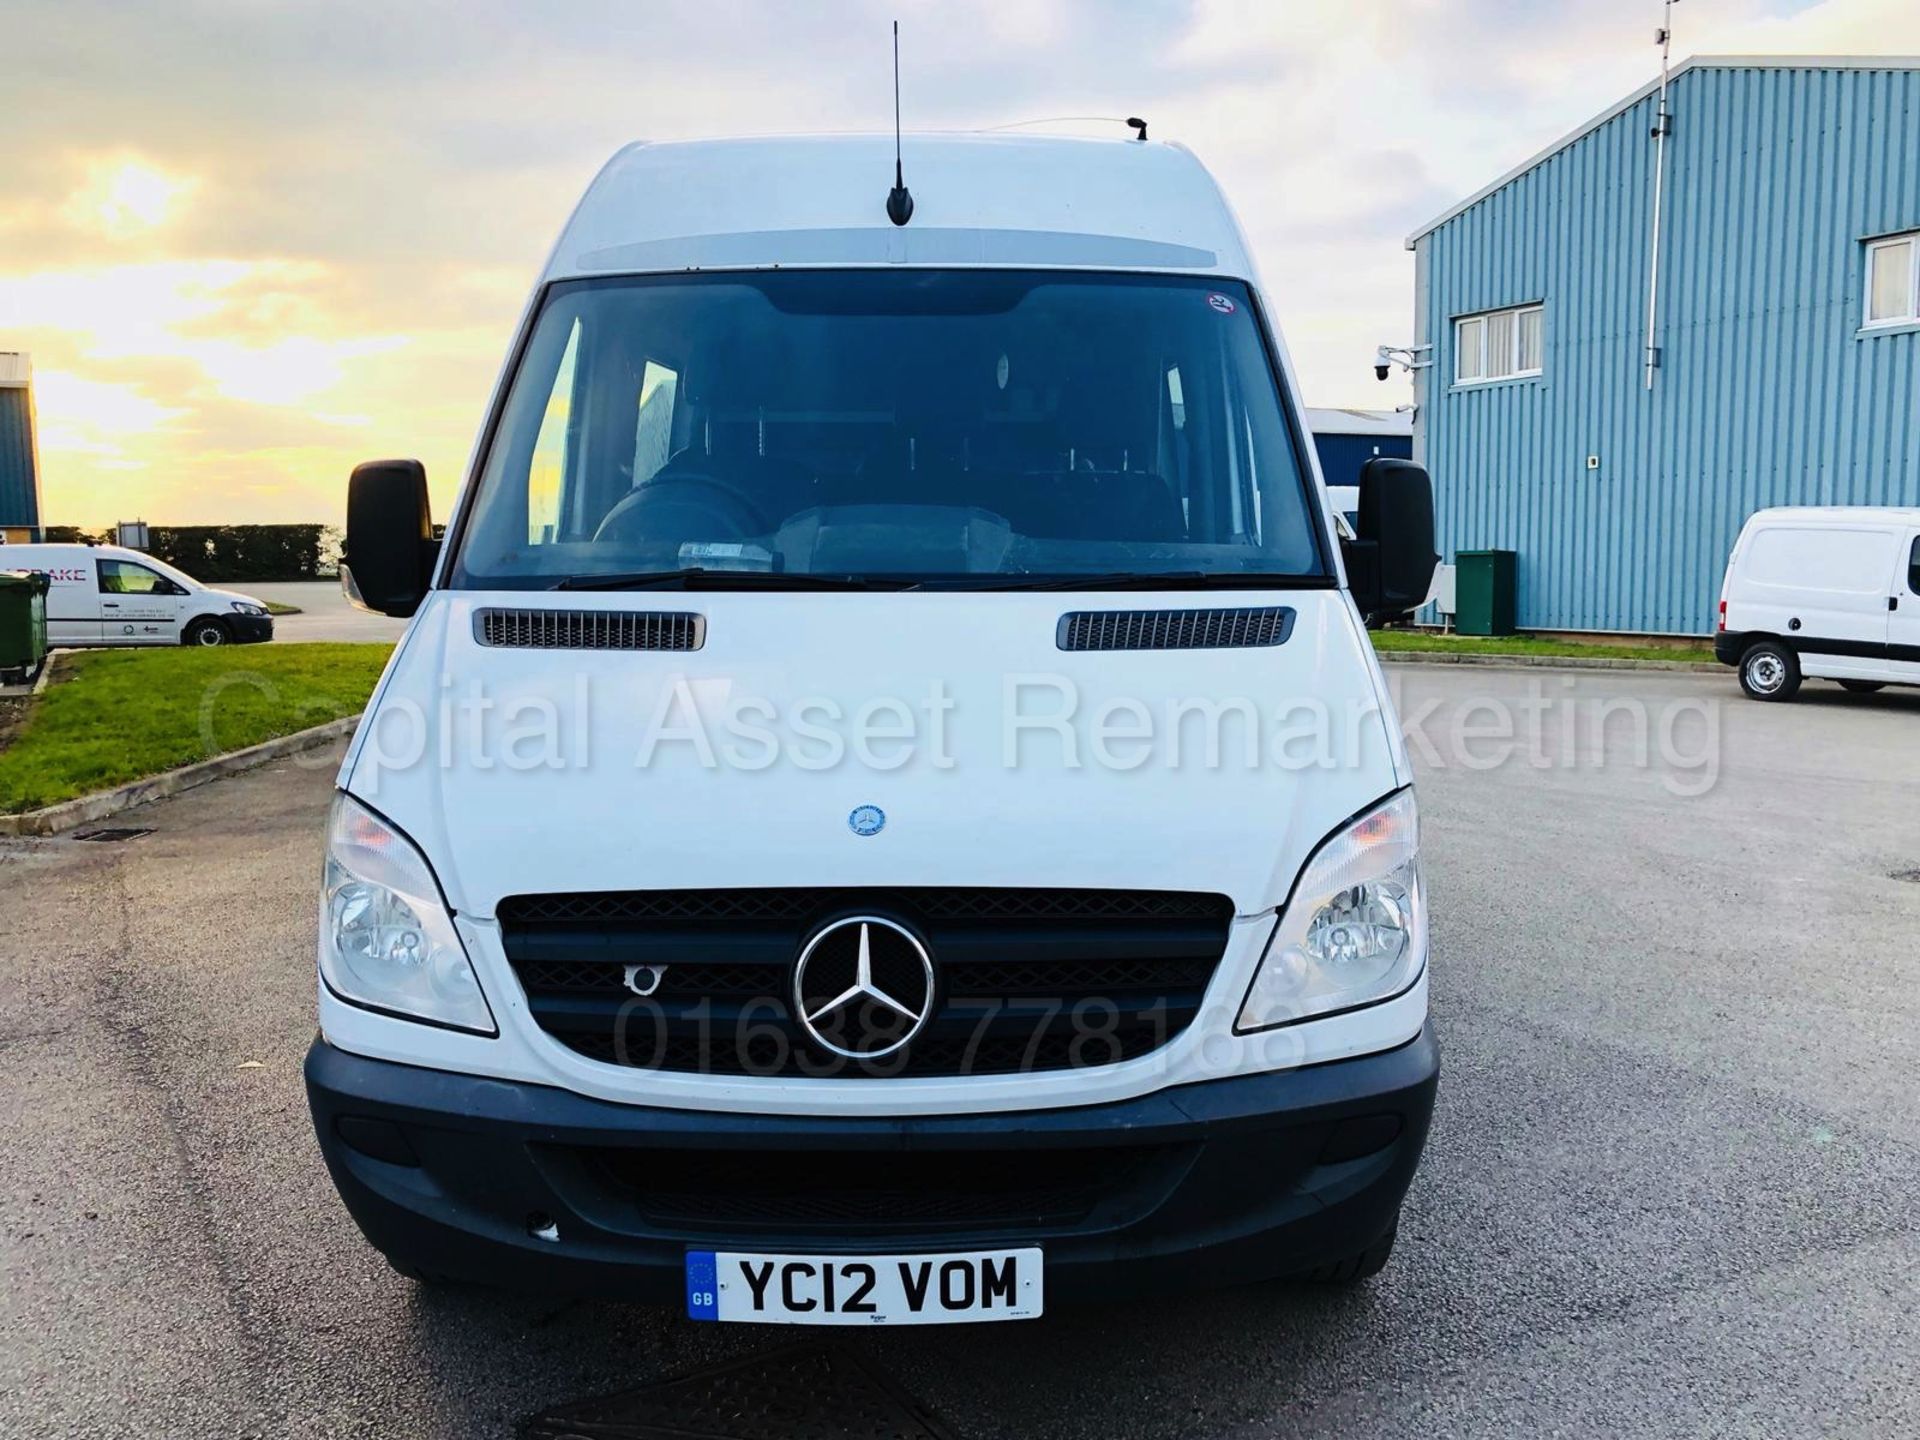 (On Sale) MERCEDES-BENZ SPRINTER 313 CDI 'MWB HI-ROOF' 7 SEATER (2012) '130 BHP - 6 SPEED' - Image 12 of 23